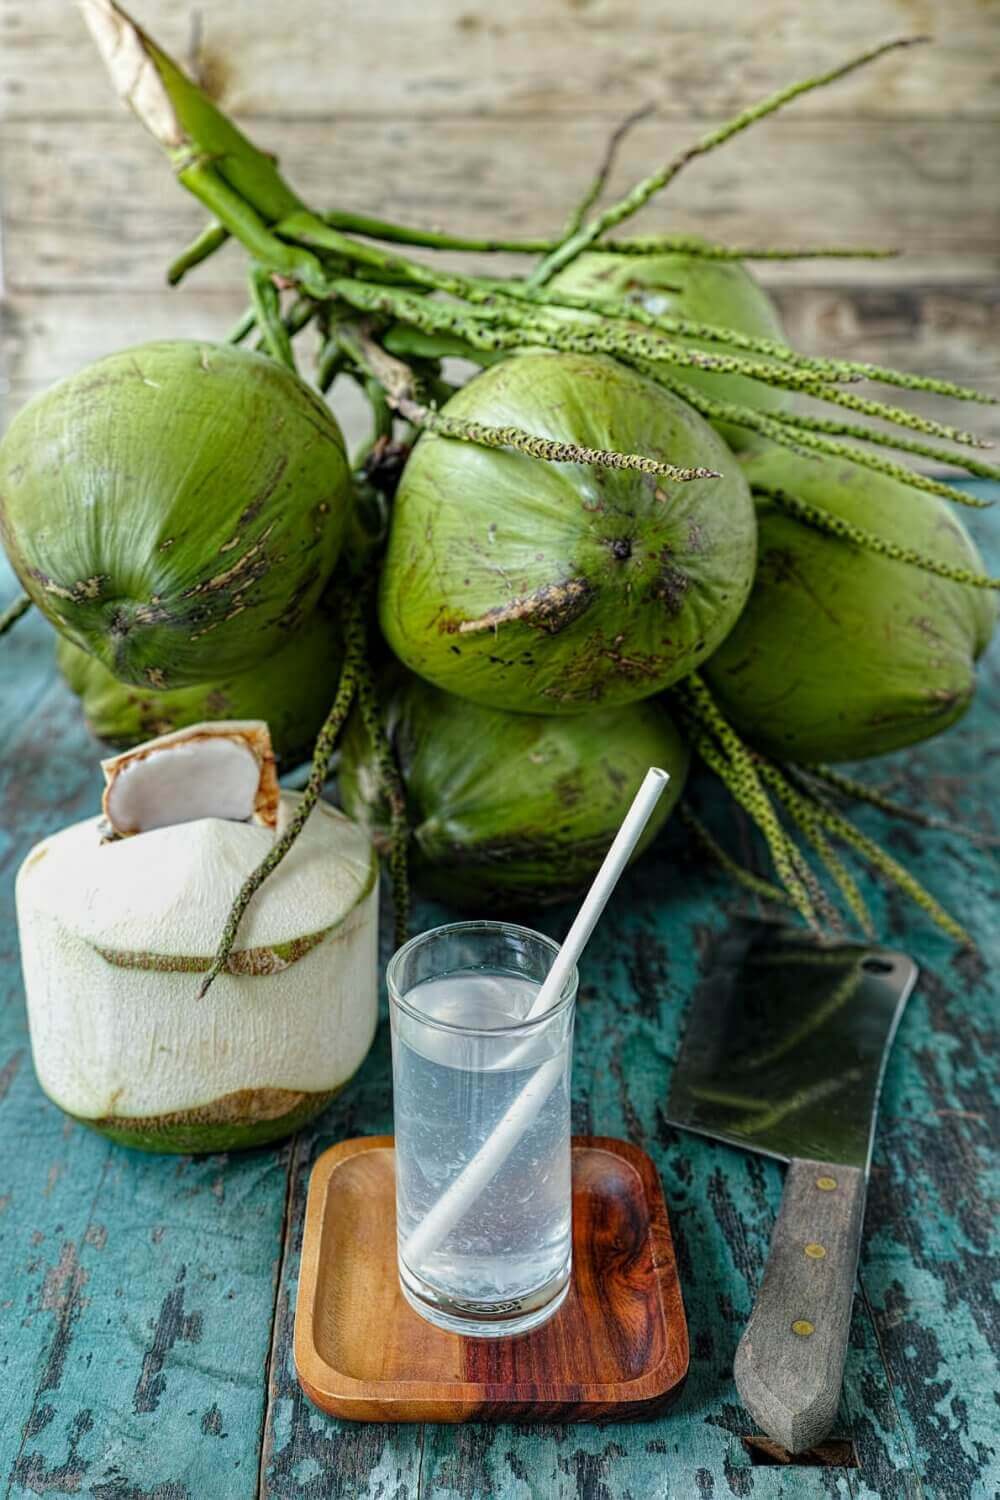 Coconut milk and water makes a refreshing drink